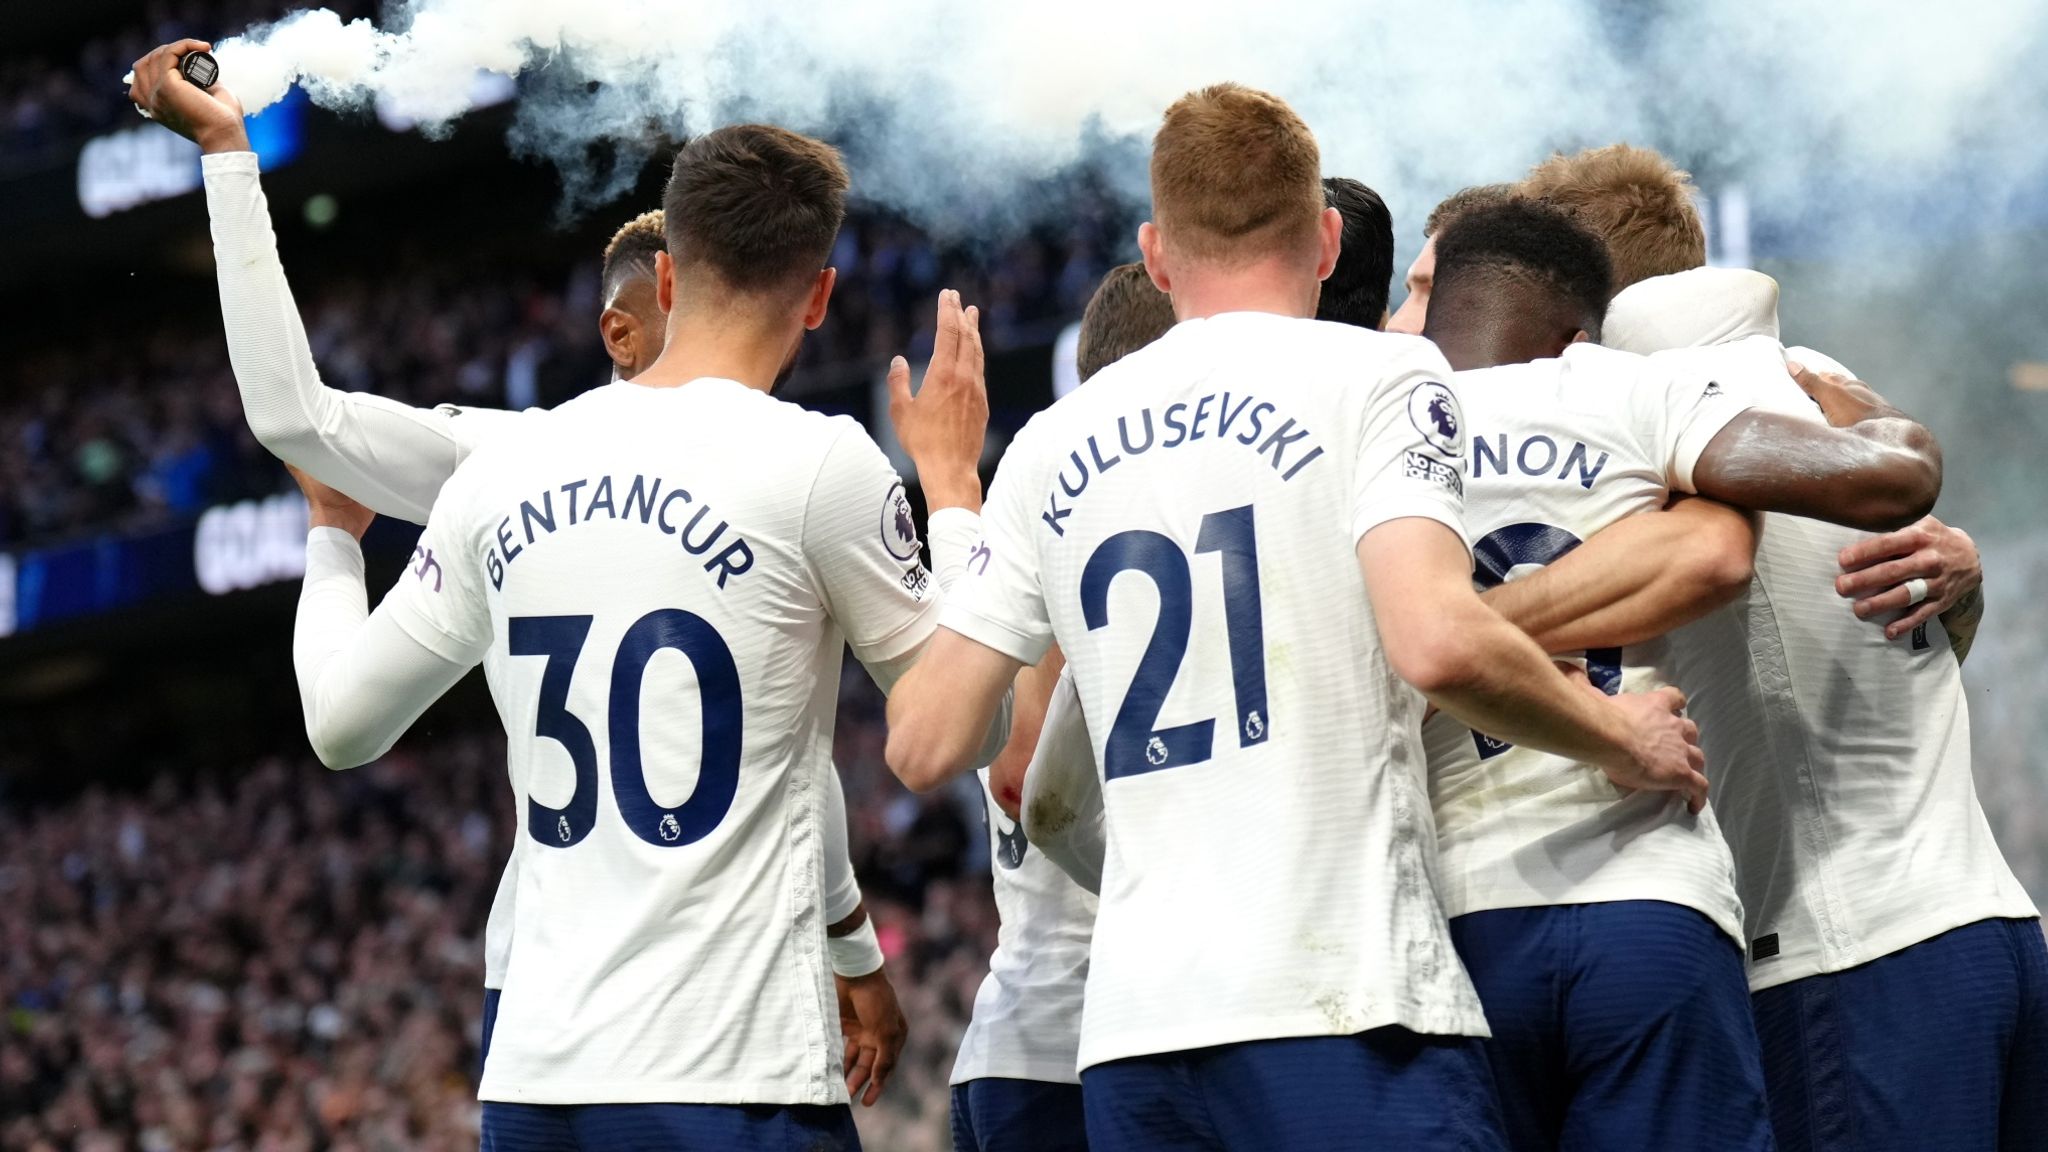 Tottenham 3-0 Arsenal Spurs overwhelm 10-man Gunners in north London derby to ignite top-four bid Football News Sky Sports